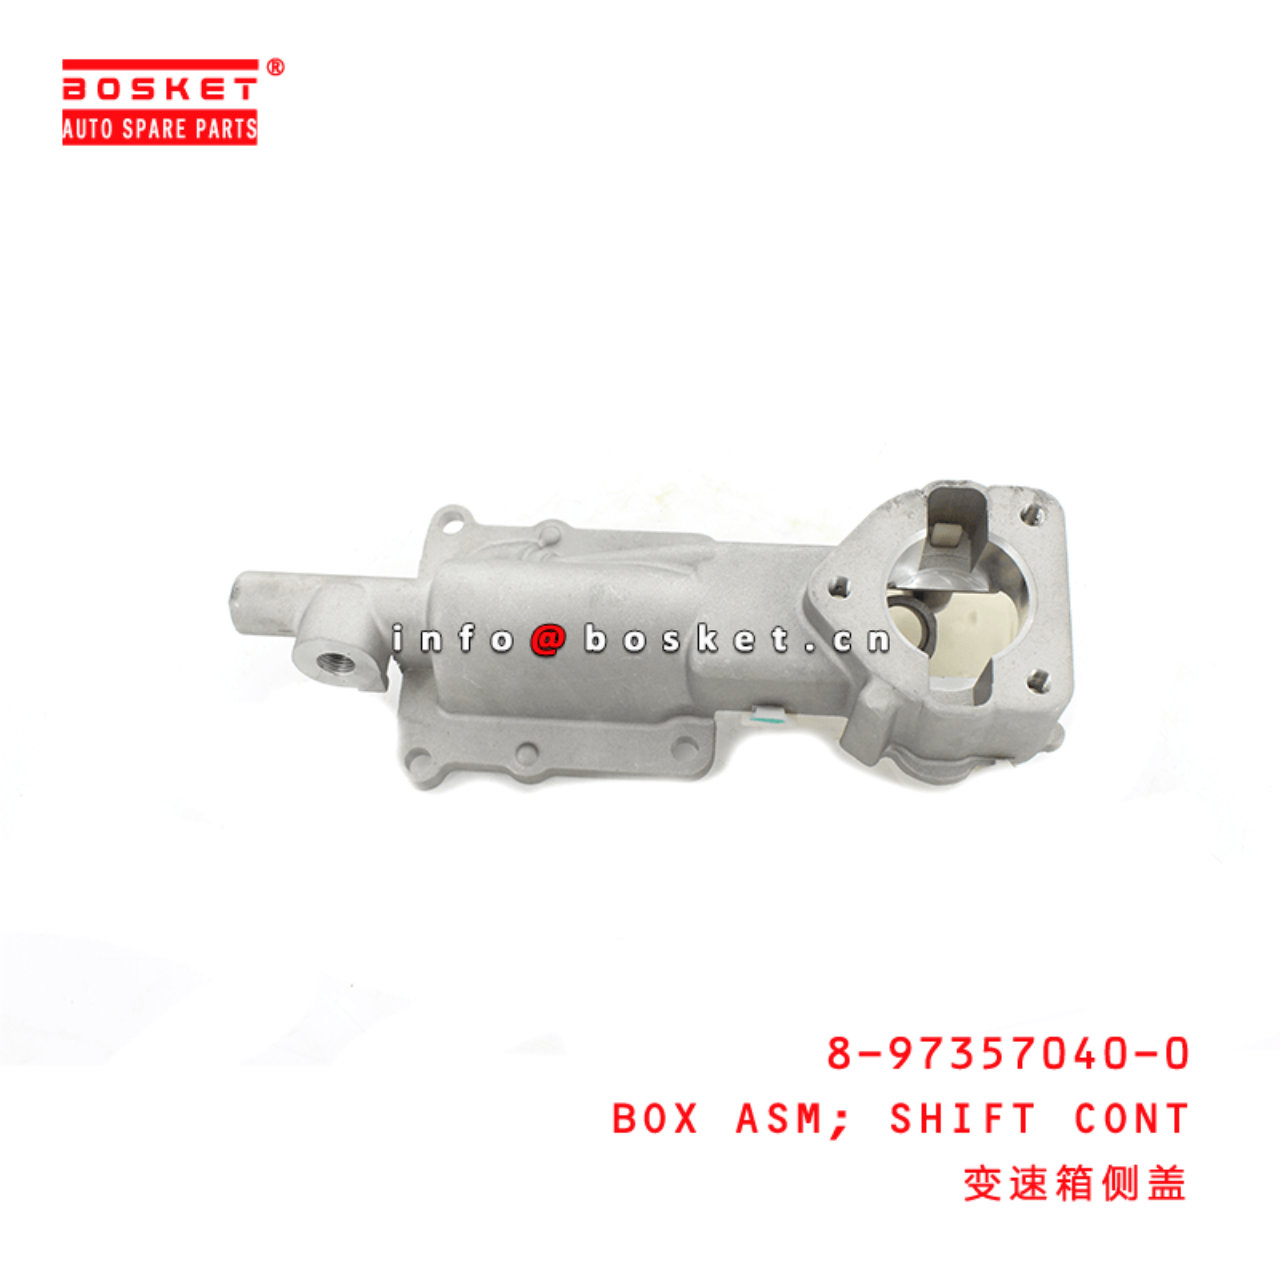 8-97357040-0 Shift Control Box Assembly Suitable for ISUZU MUX D-MAX 8973570400